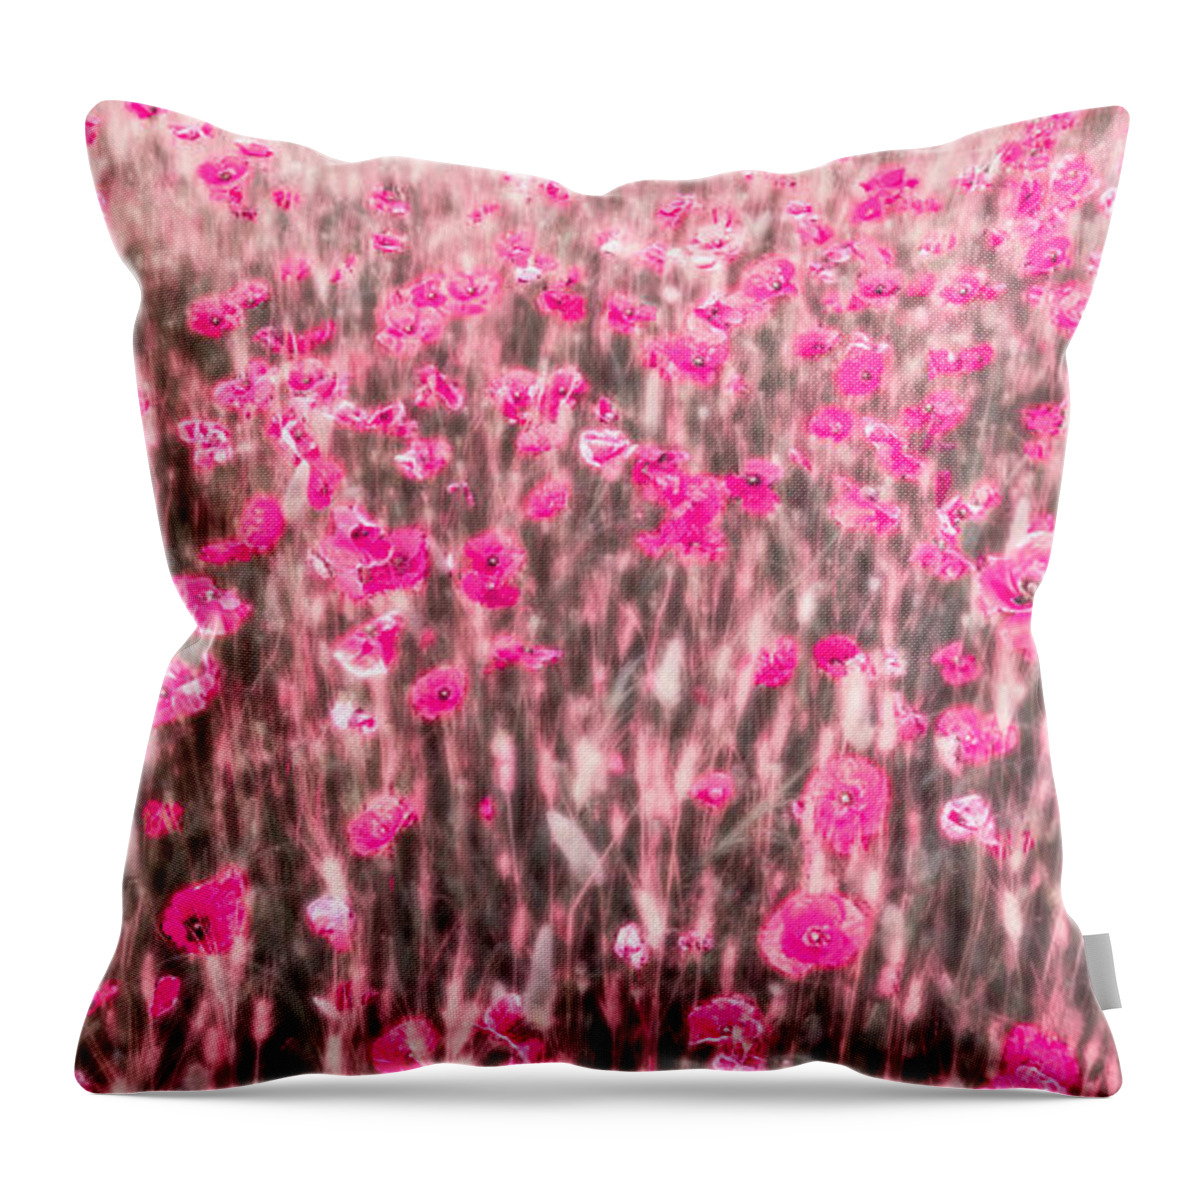 Abstract Throw Pillow featuring the photograph A Summer Full Of Poppies by Hannes Cmarits